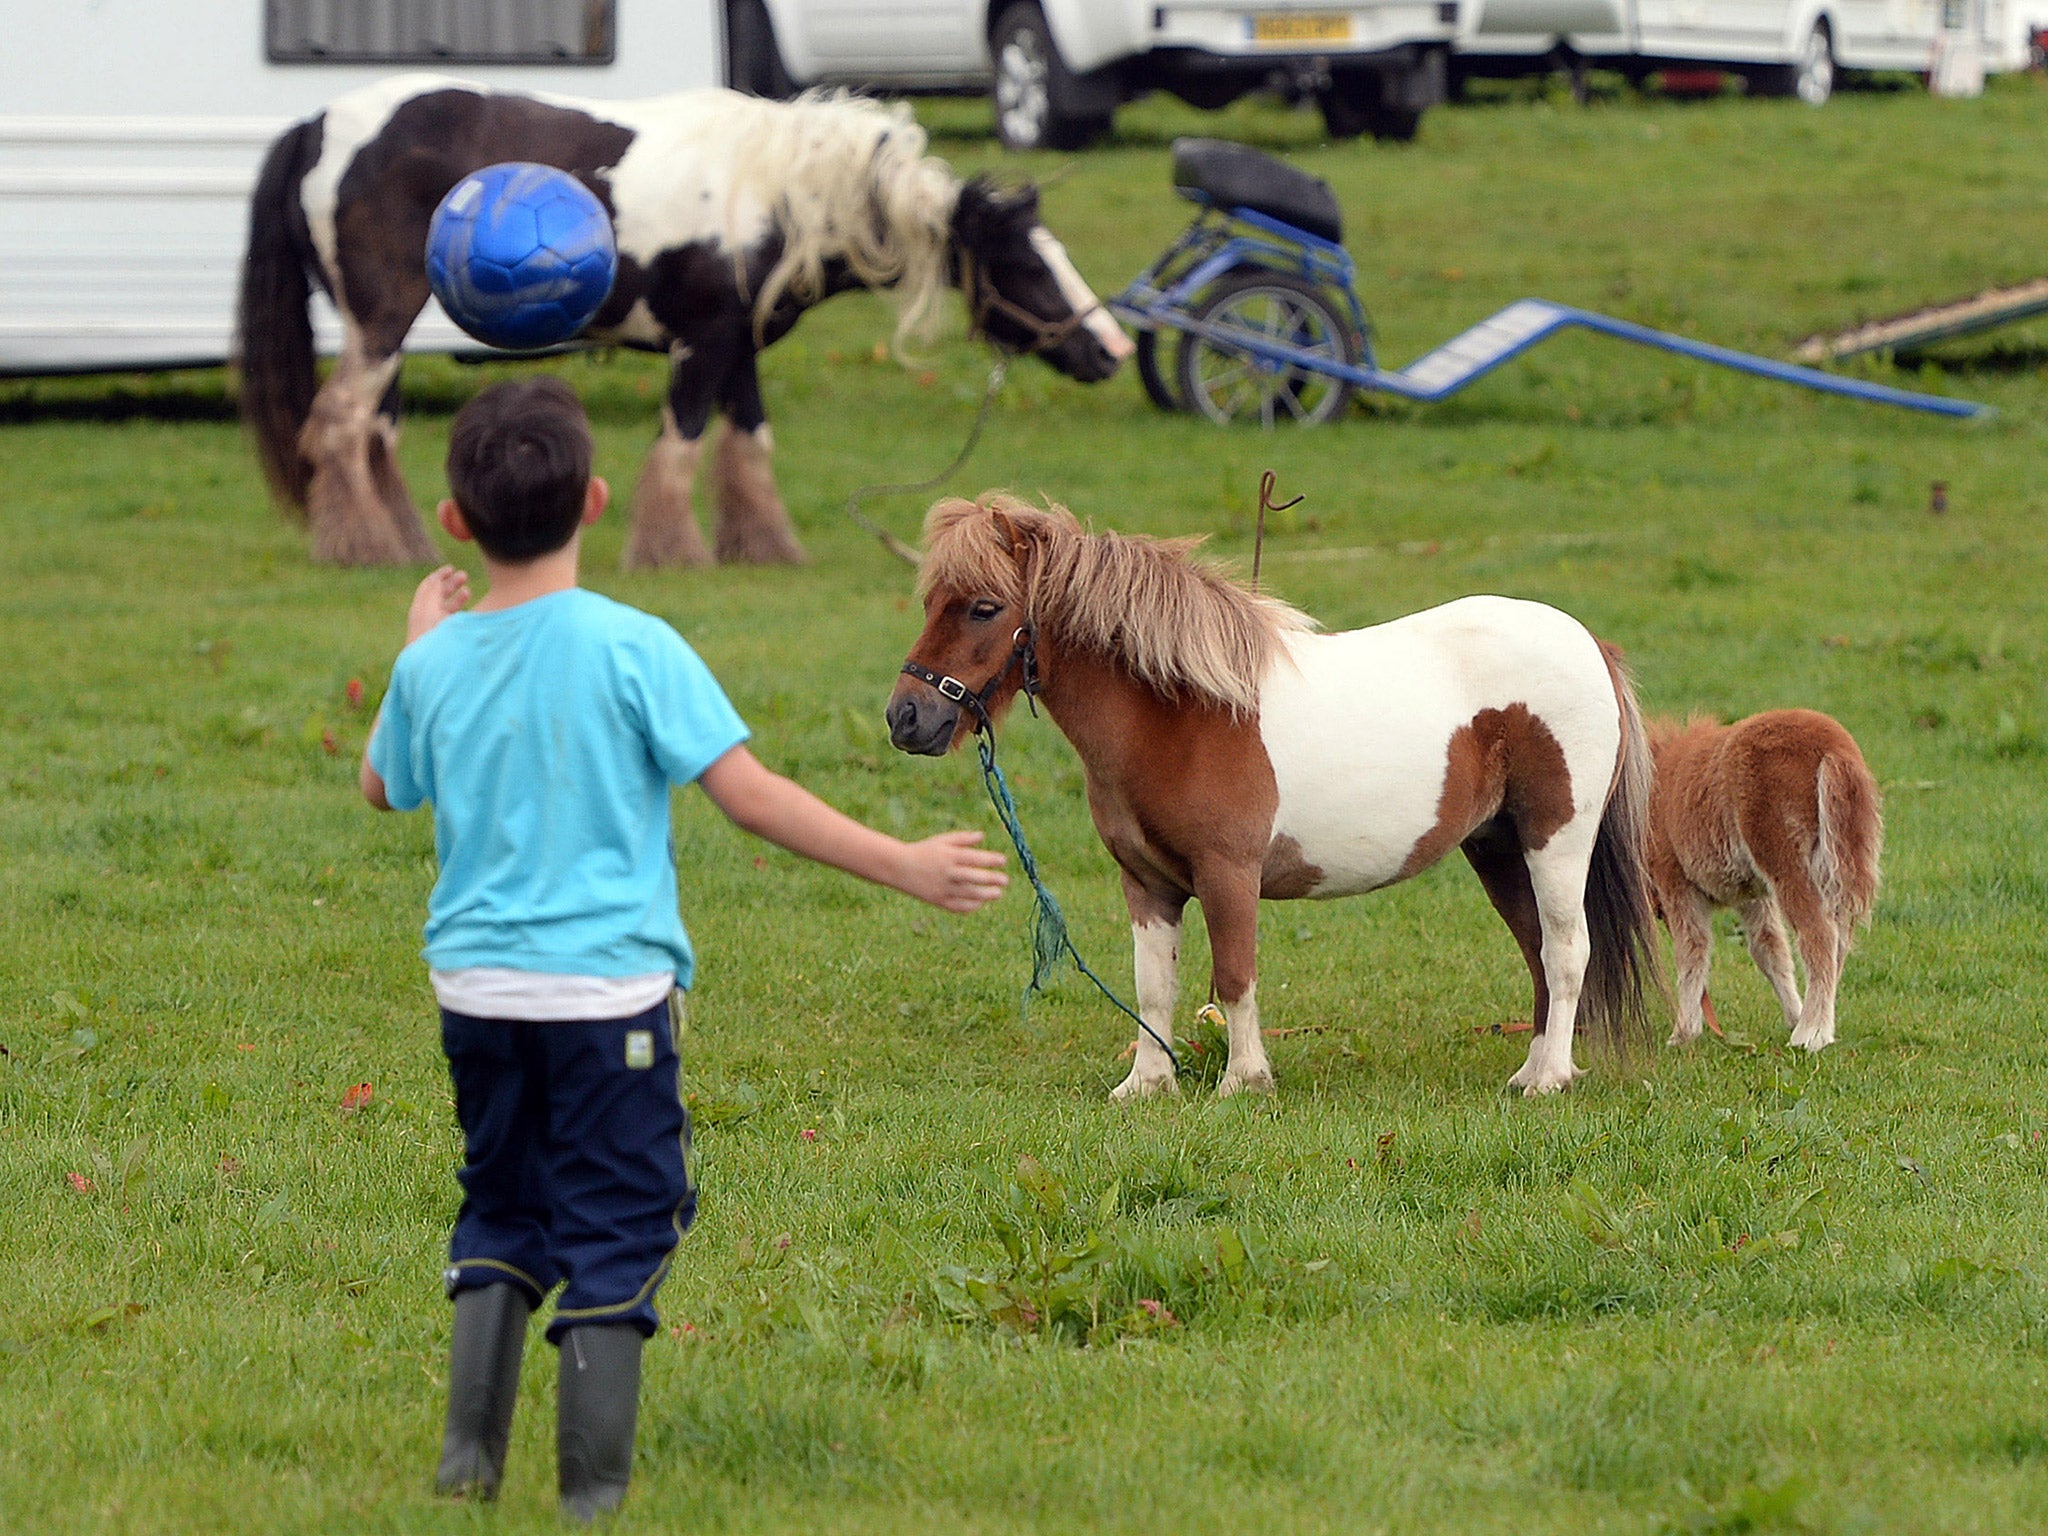 A child plays with a ball during the Appleby Horse Fair. The event is one of the key gathering points for the Romany, gypsy and traveling community